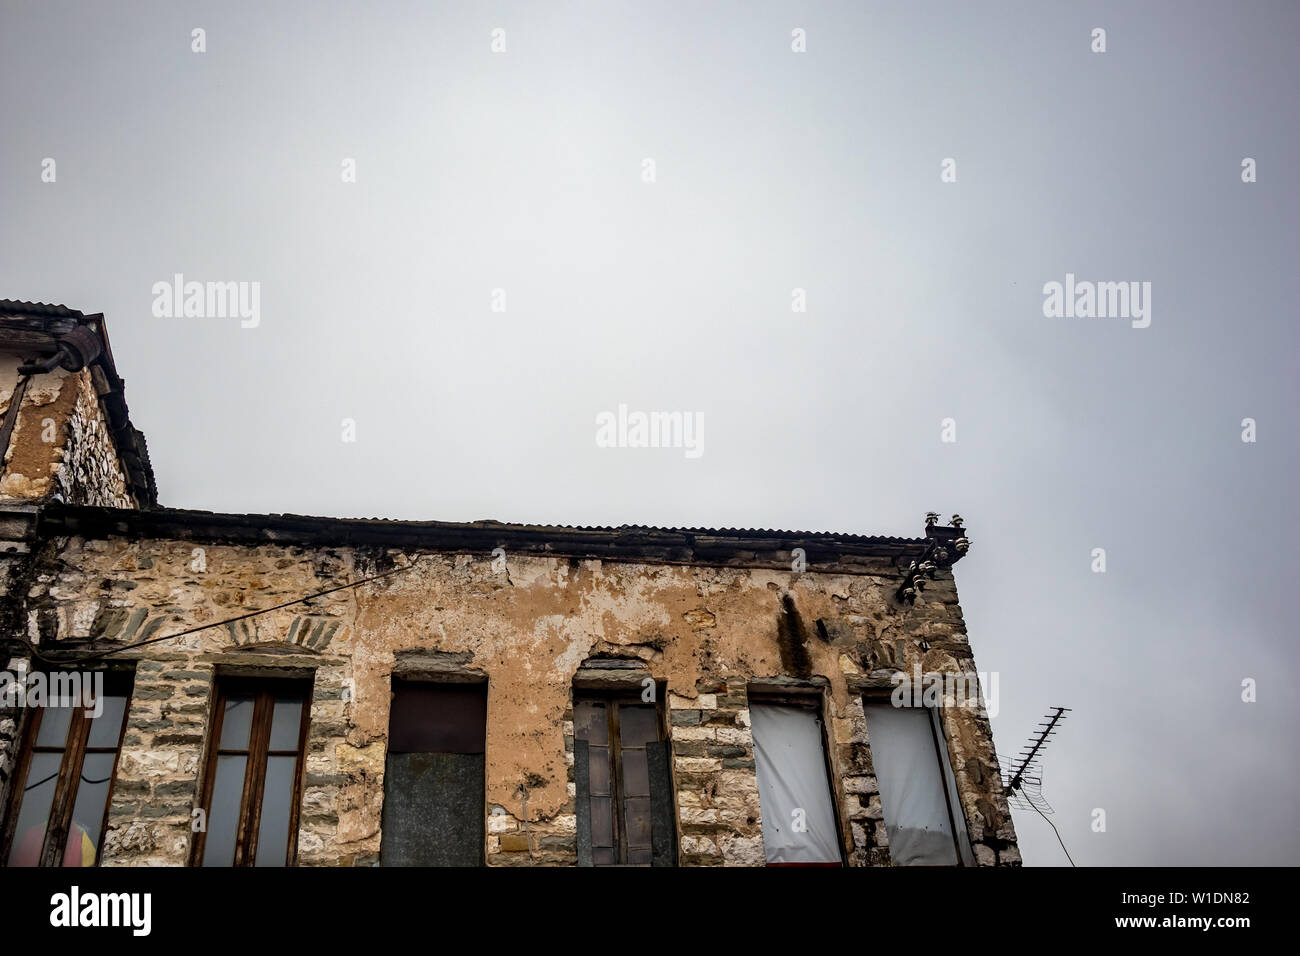 Old Greek industrial building under construction with bricks visible, Ioannina downtown, Greece. Moody foggy spring morning, no people, rusty TV antenna silhouette Stock Photo